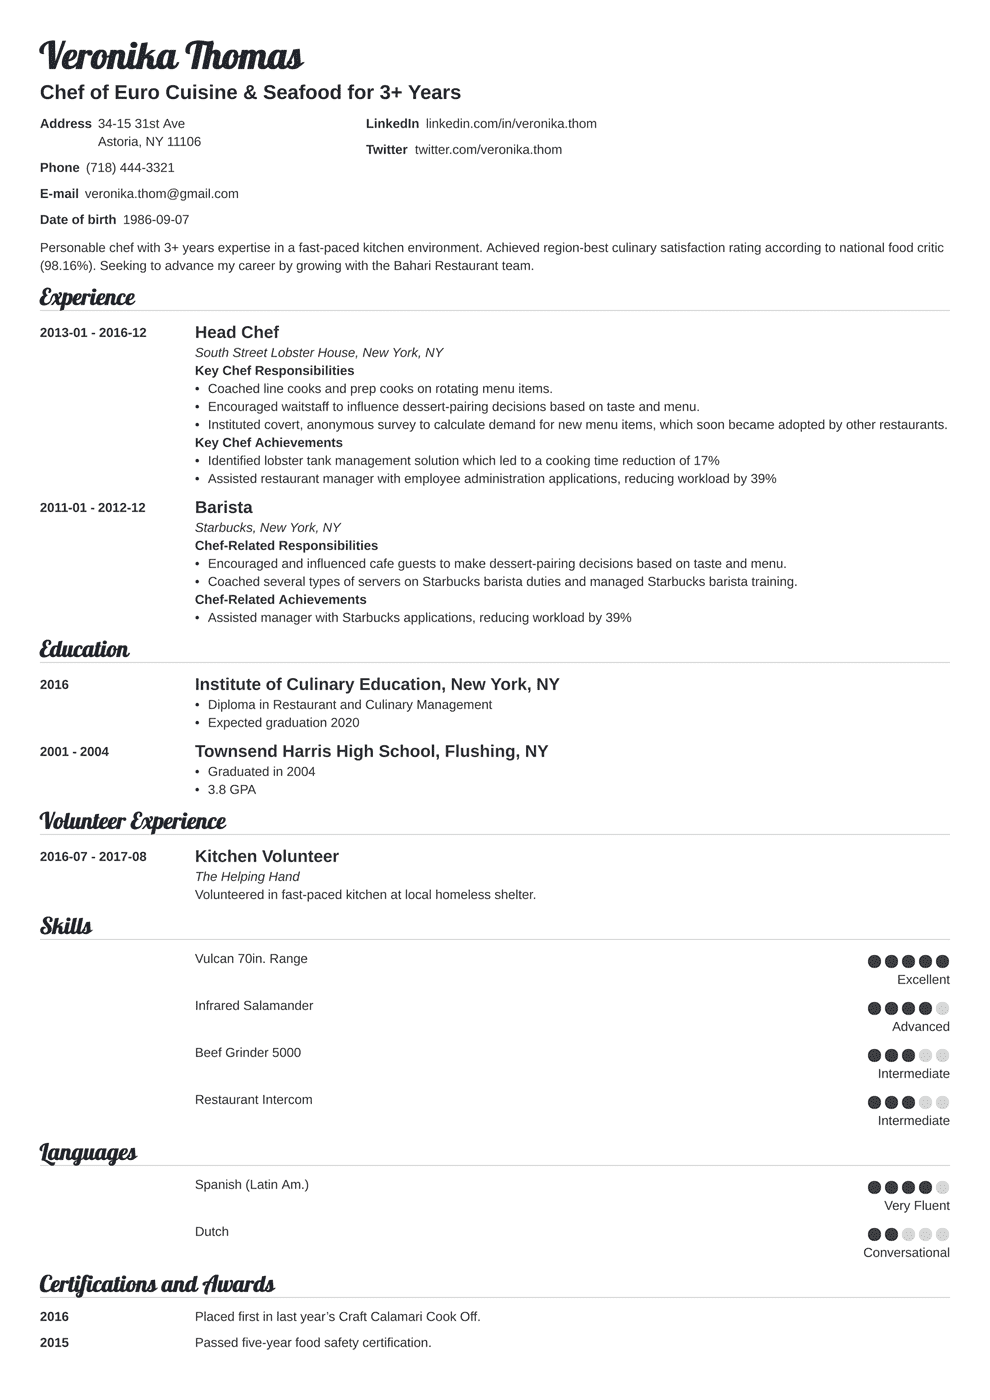 Resume Templates Microsoft Word Chef Cv Template Executive Resume Word Free Download Templates Microsoft Sample Complete Guide resume templates microsoft word|wikiresume.com